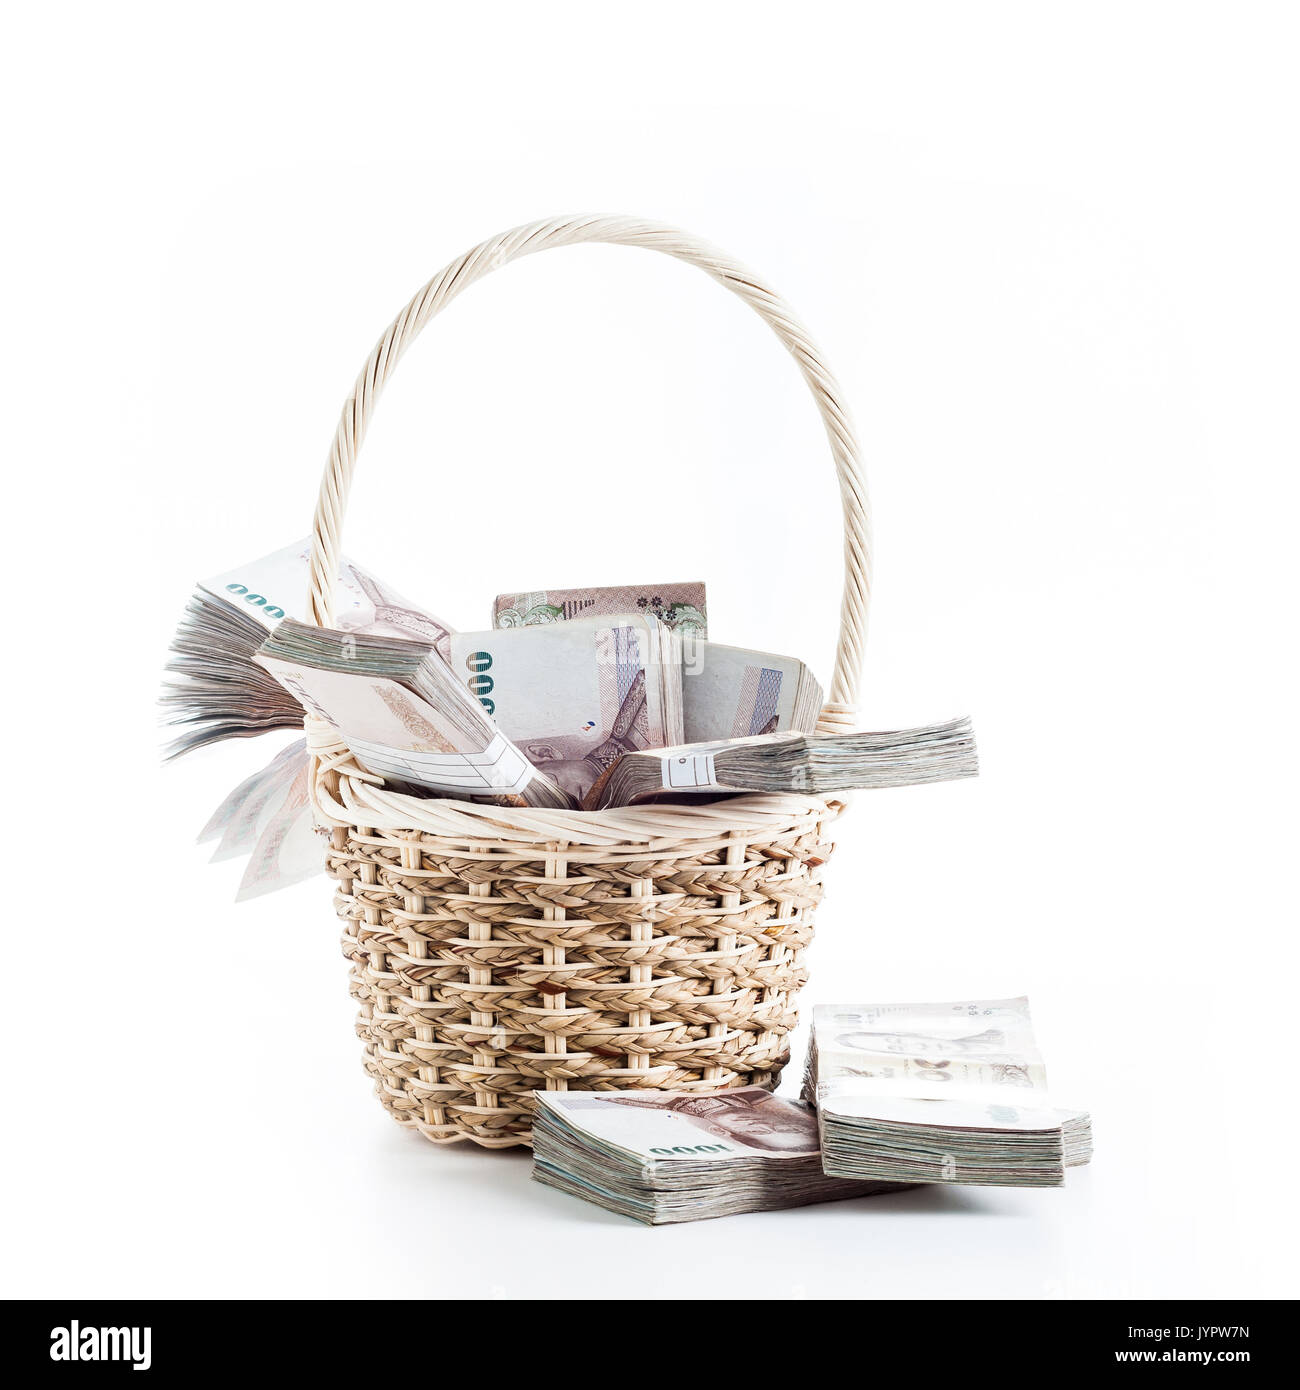 Bunches of Thai baht (THB) banknotes in Straw wicker basket. Thailand currency. Stock Photo